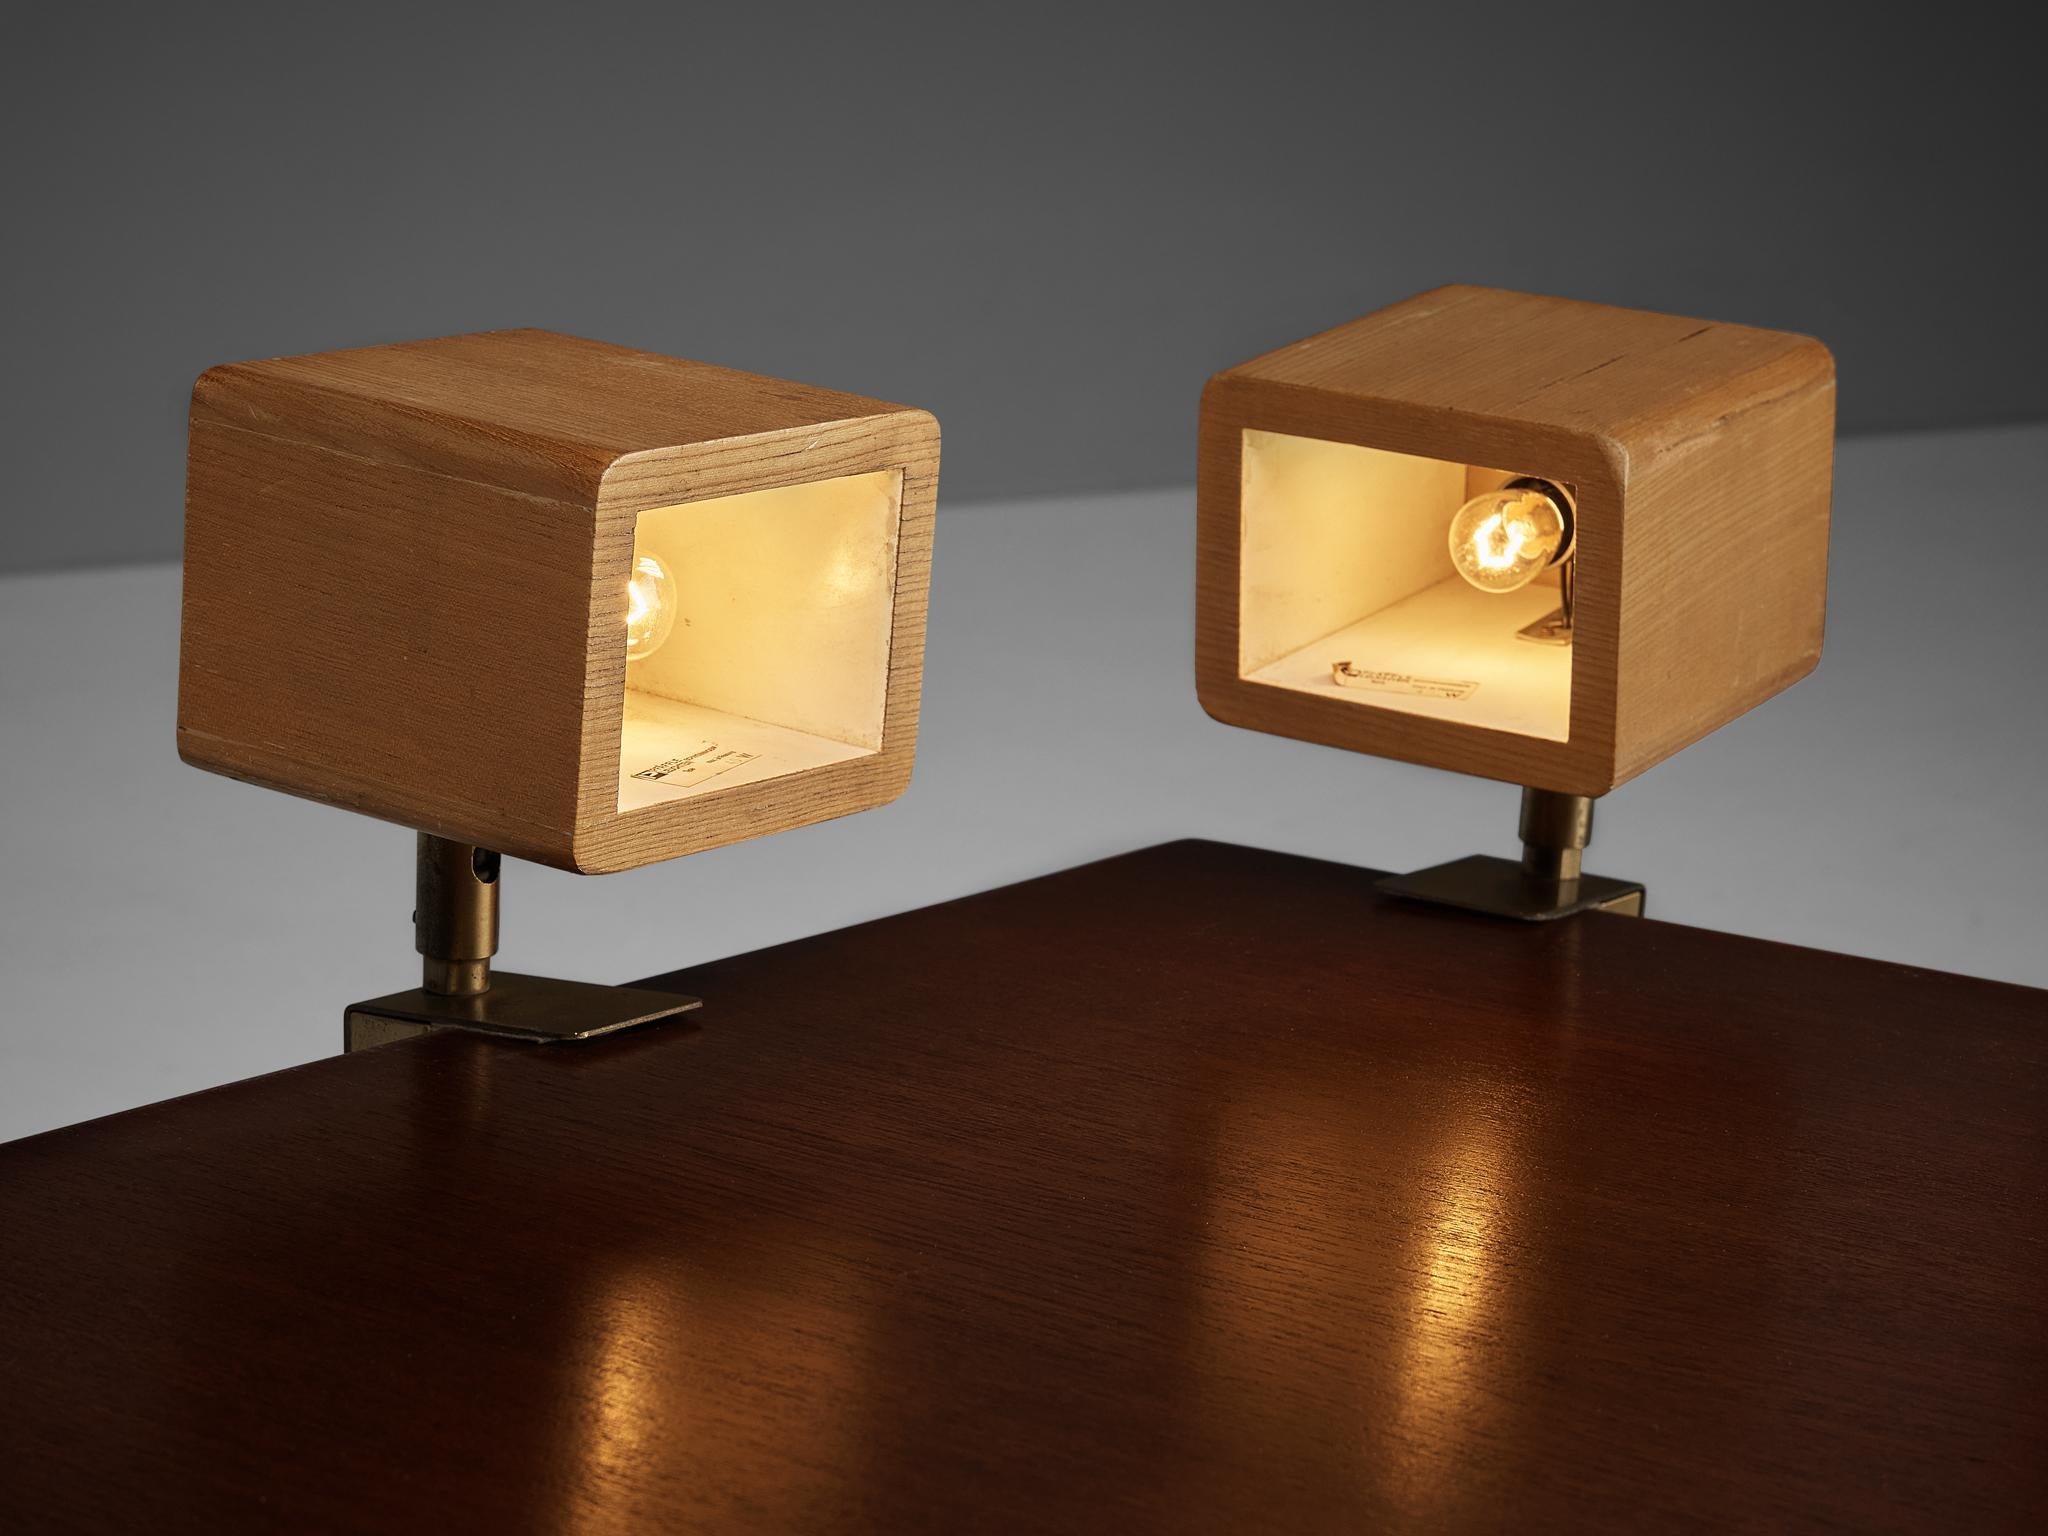 Mid-20th Century German Pair of Mounted Wooden Desk Lamps with Brass